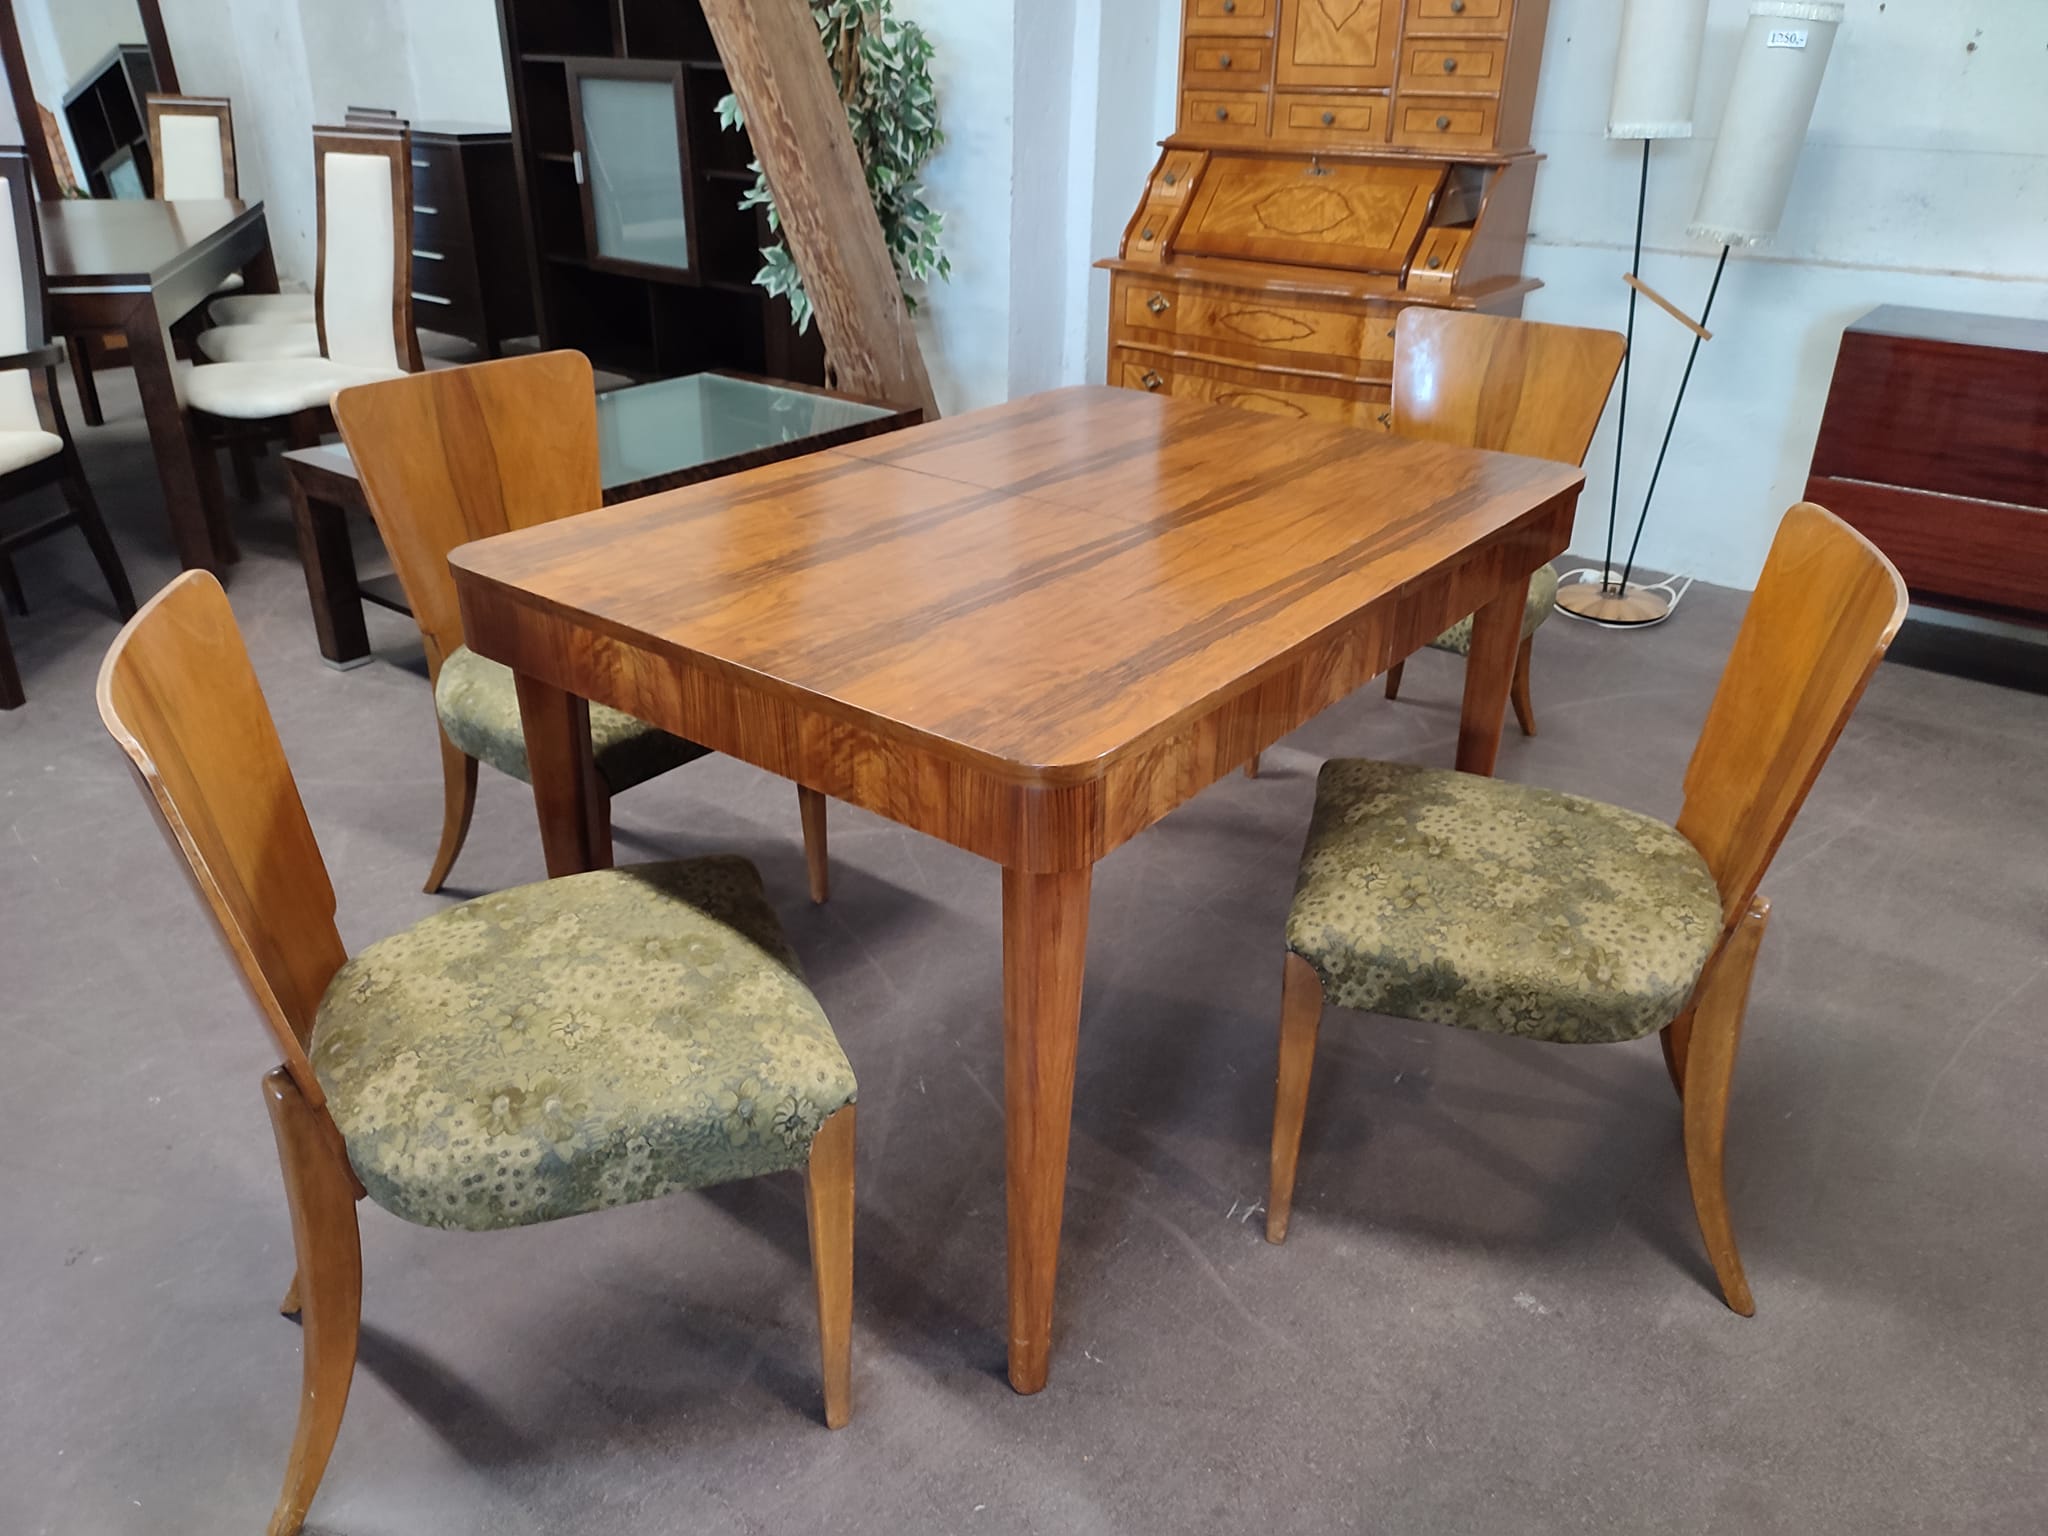 Dining set - table and chairs